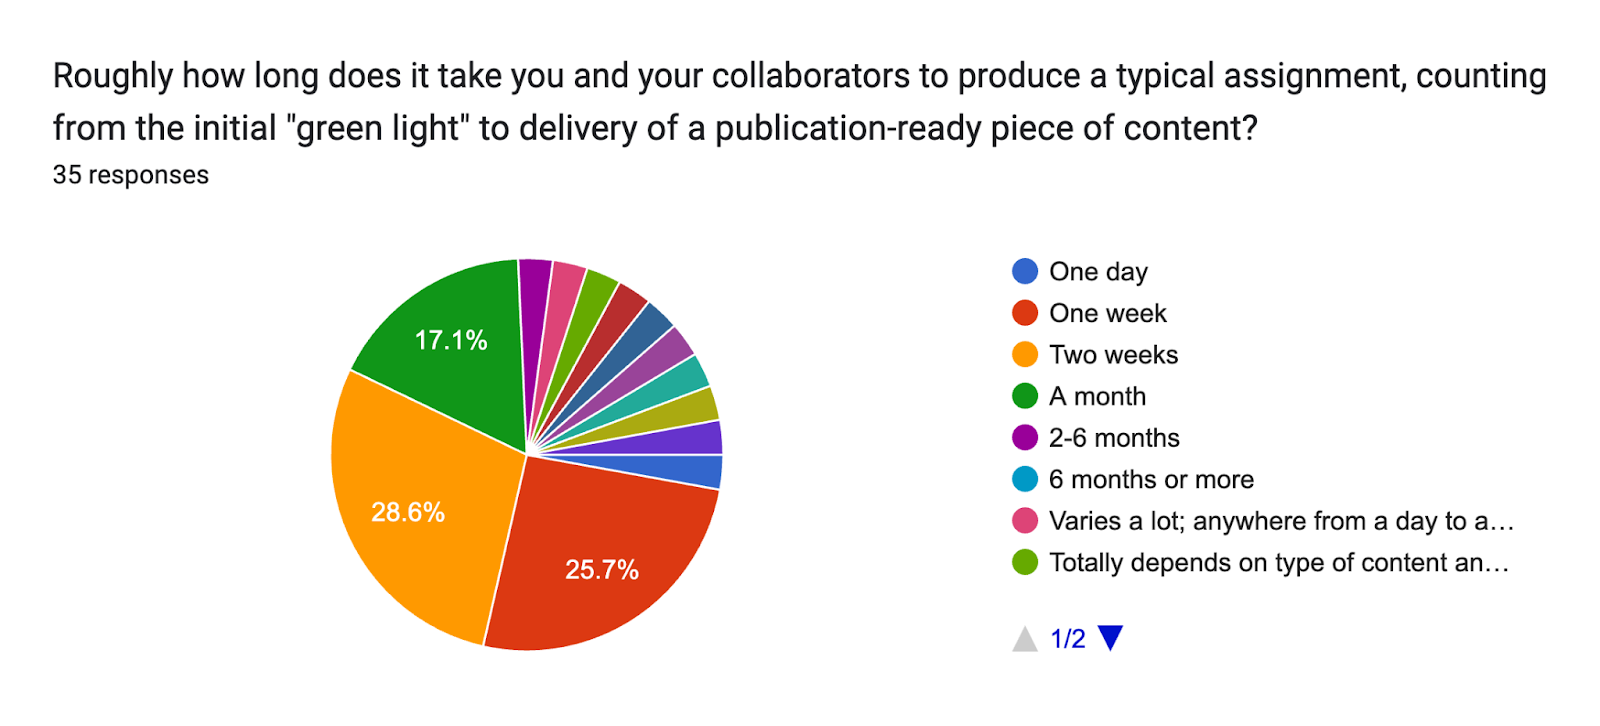 Forms response chart. Question title: Roughly how long does it take you and your collaborators to produce a typical assignment, counting from the initial "green light" to delivery of a publication-ready piece of content?  . Number of responses: 35 responses.